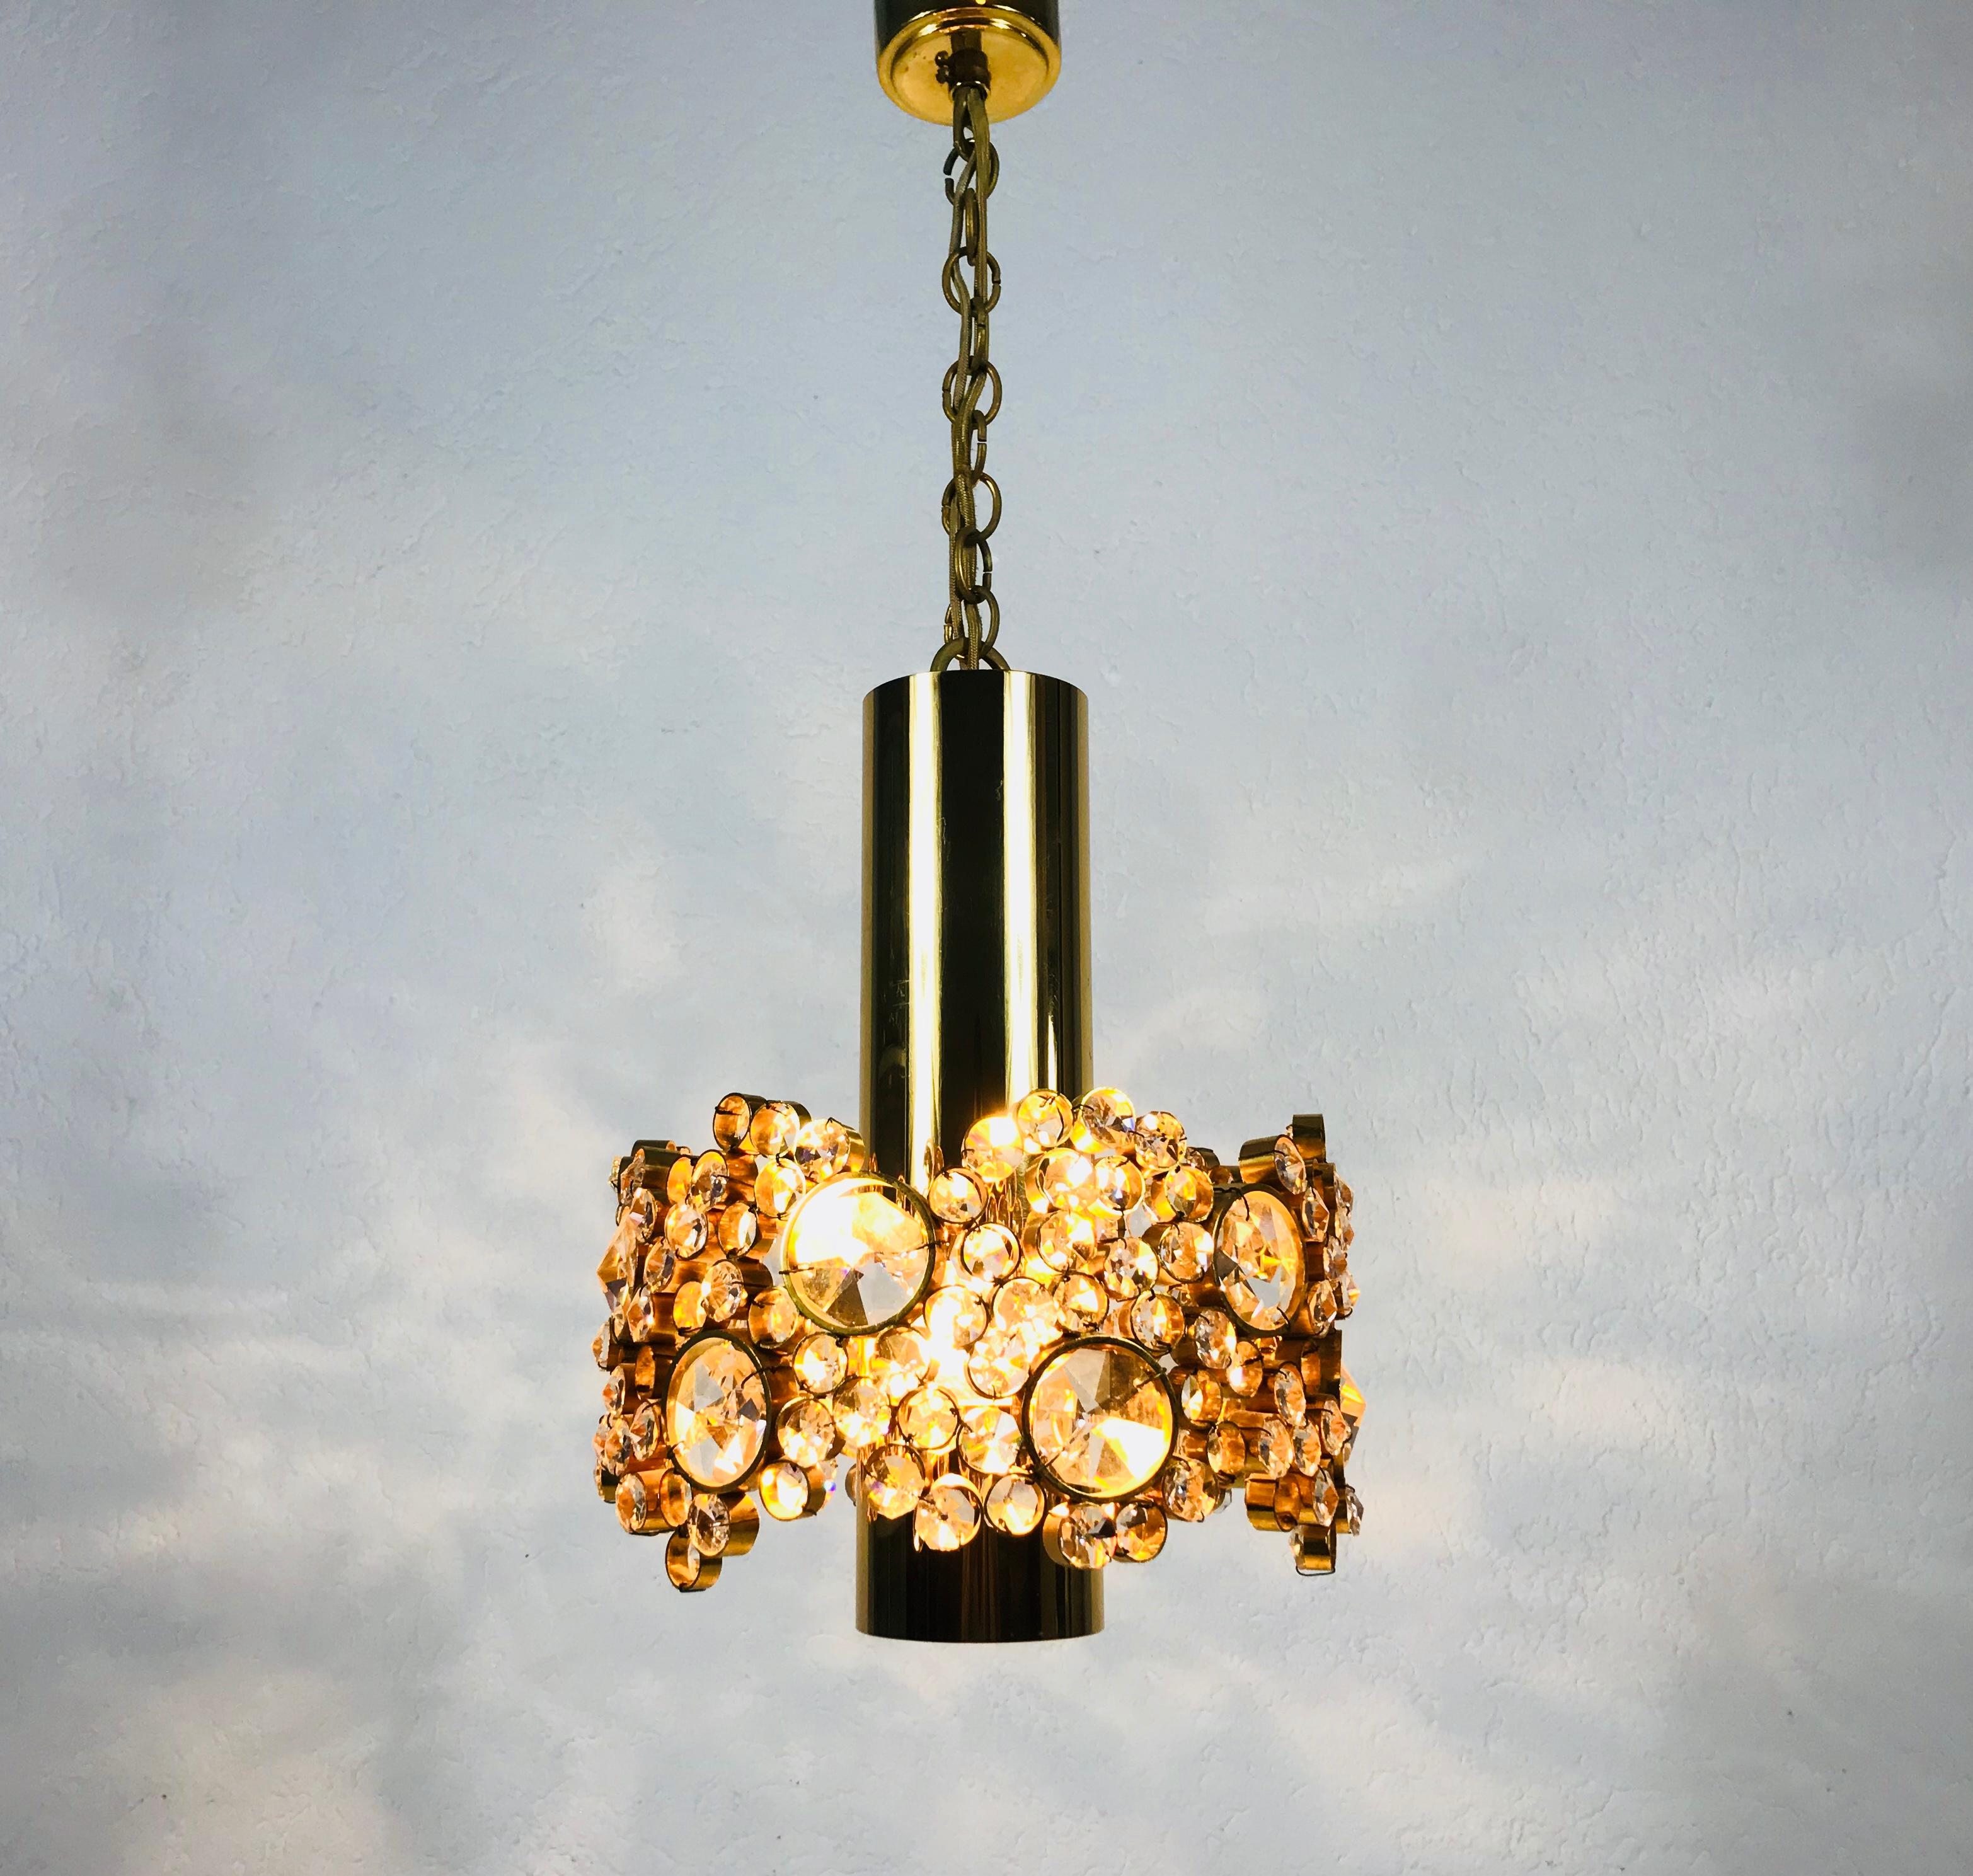 An extraordinary pendant lamp by Palwa made in Germany in the 1970s. The lamp has a very elegant design. It is made in the period of Hollywood Regency. Round Gilt brass body with one E27 socket. The socket is surrounded with very elegant crystals.